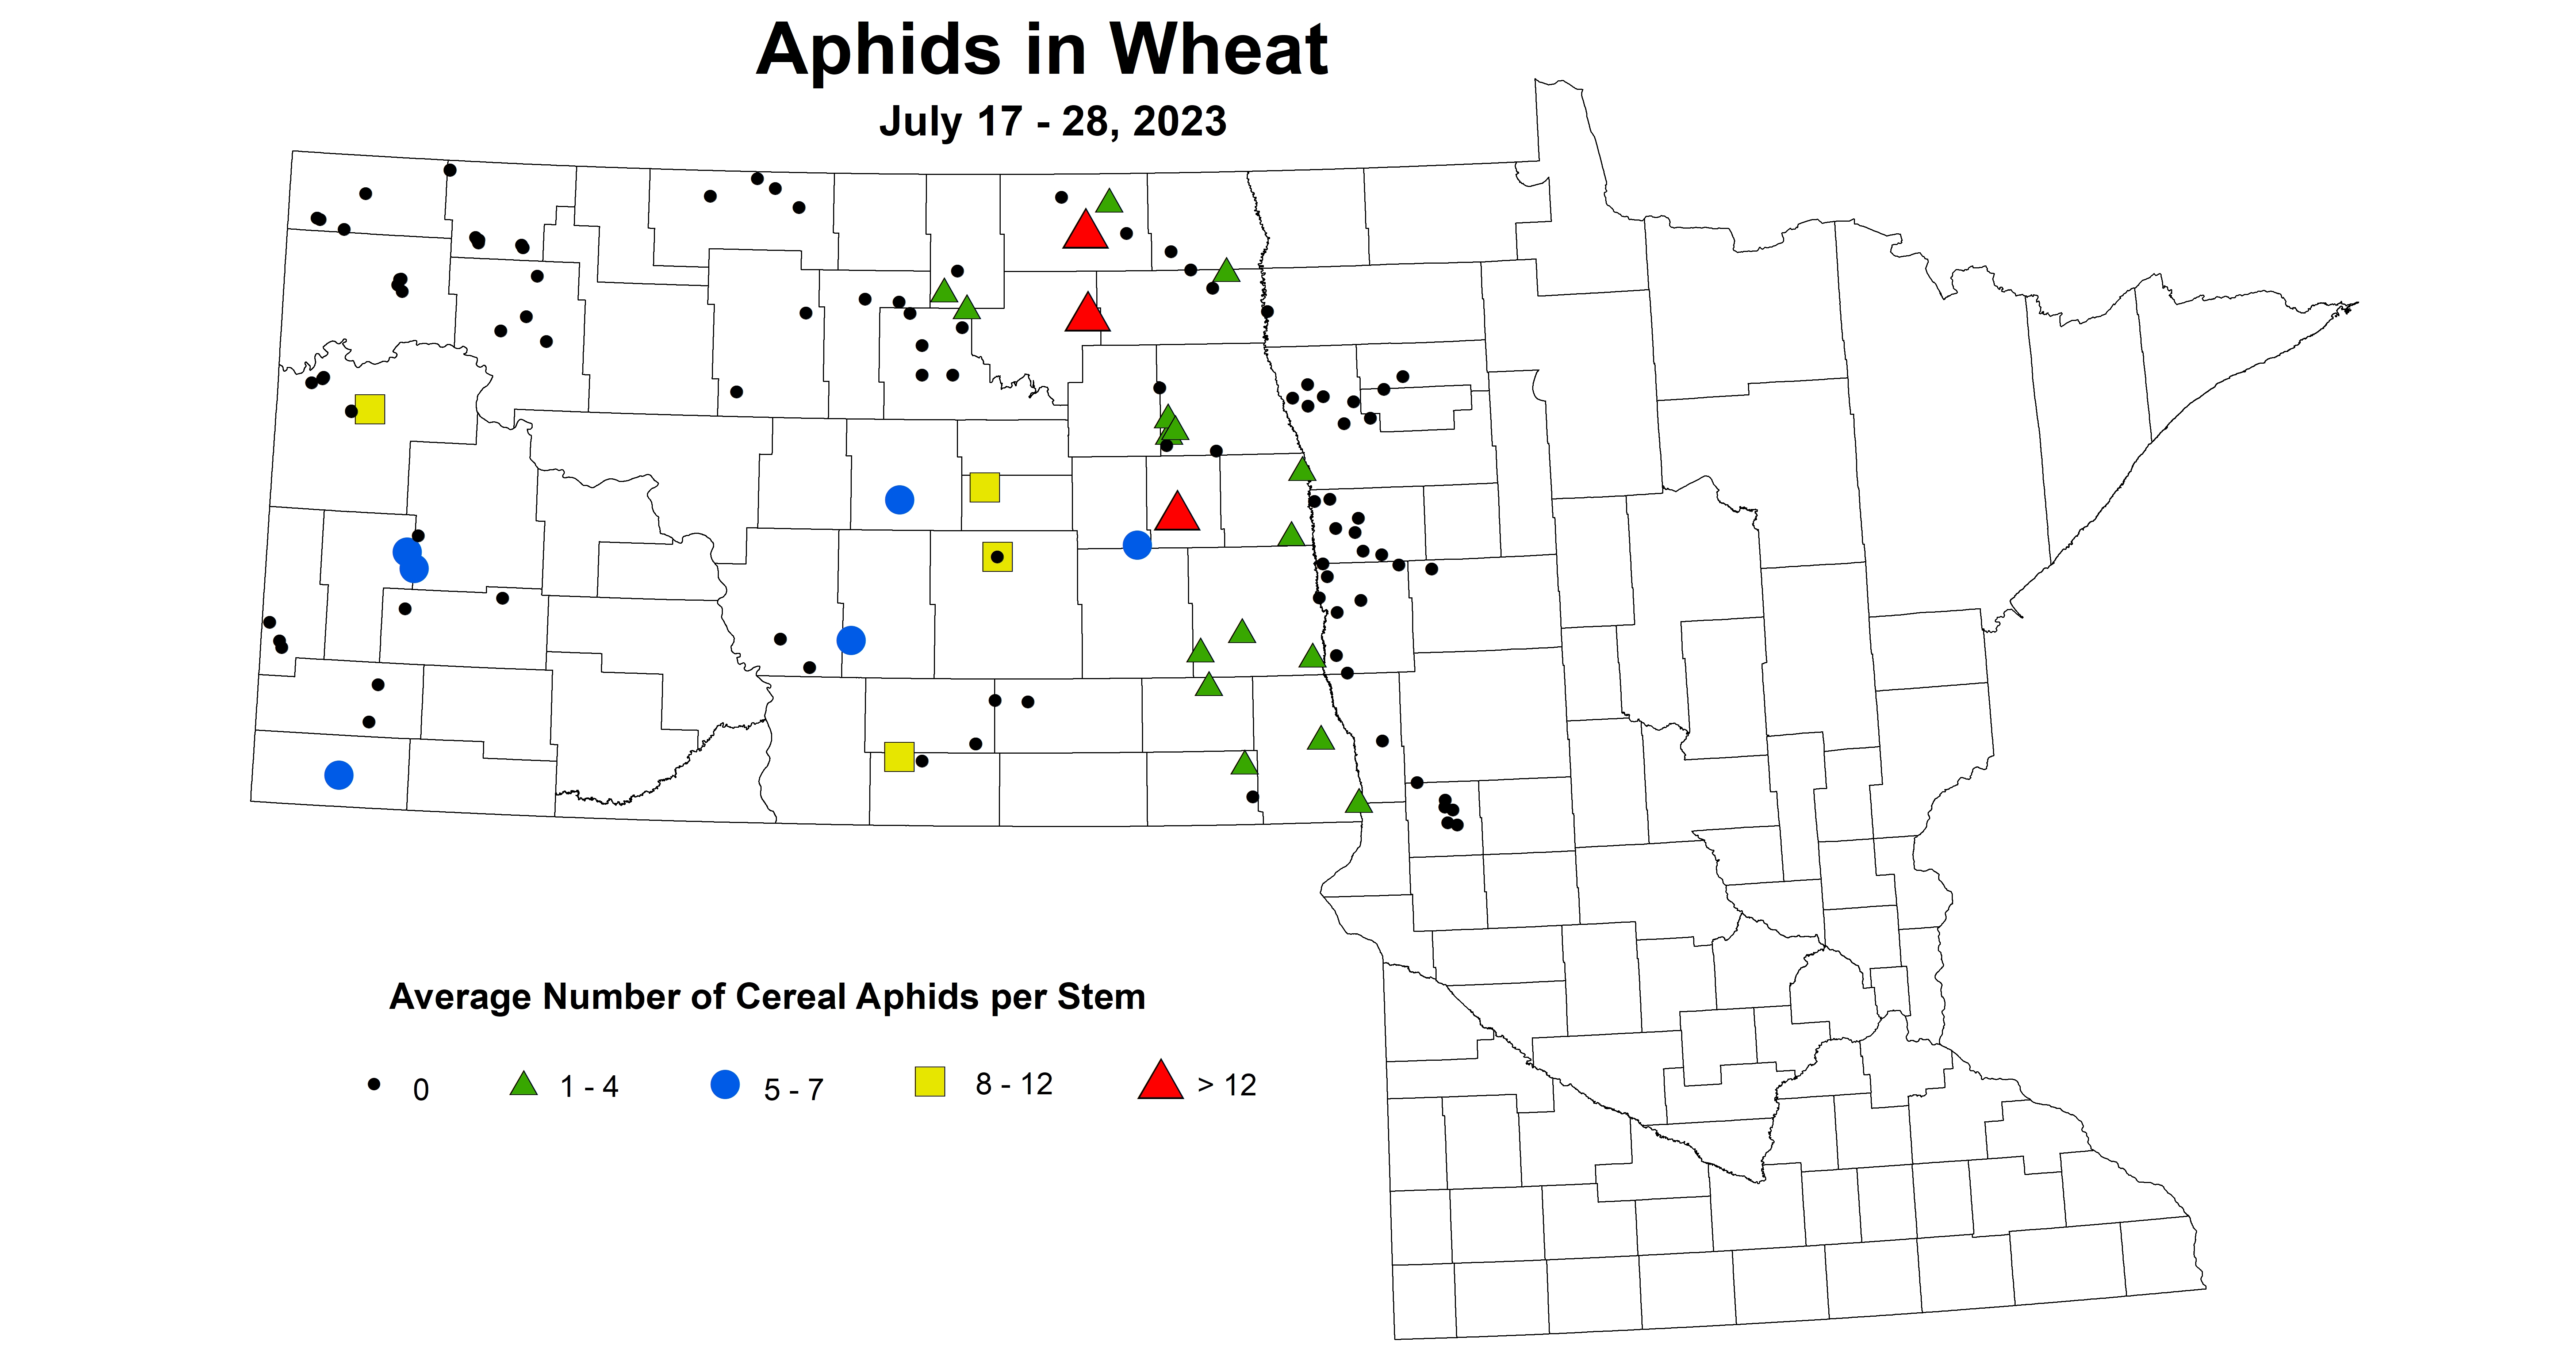 wheat aphids July 17-28 2023